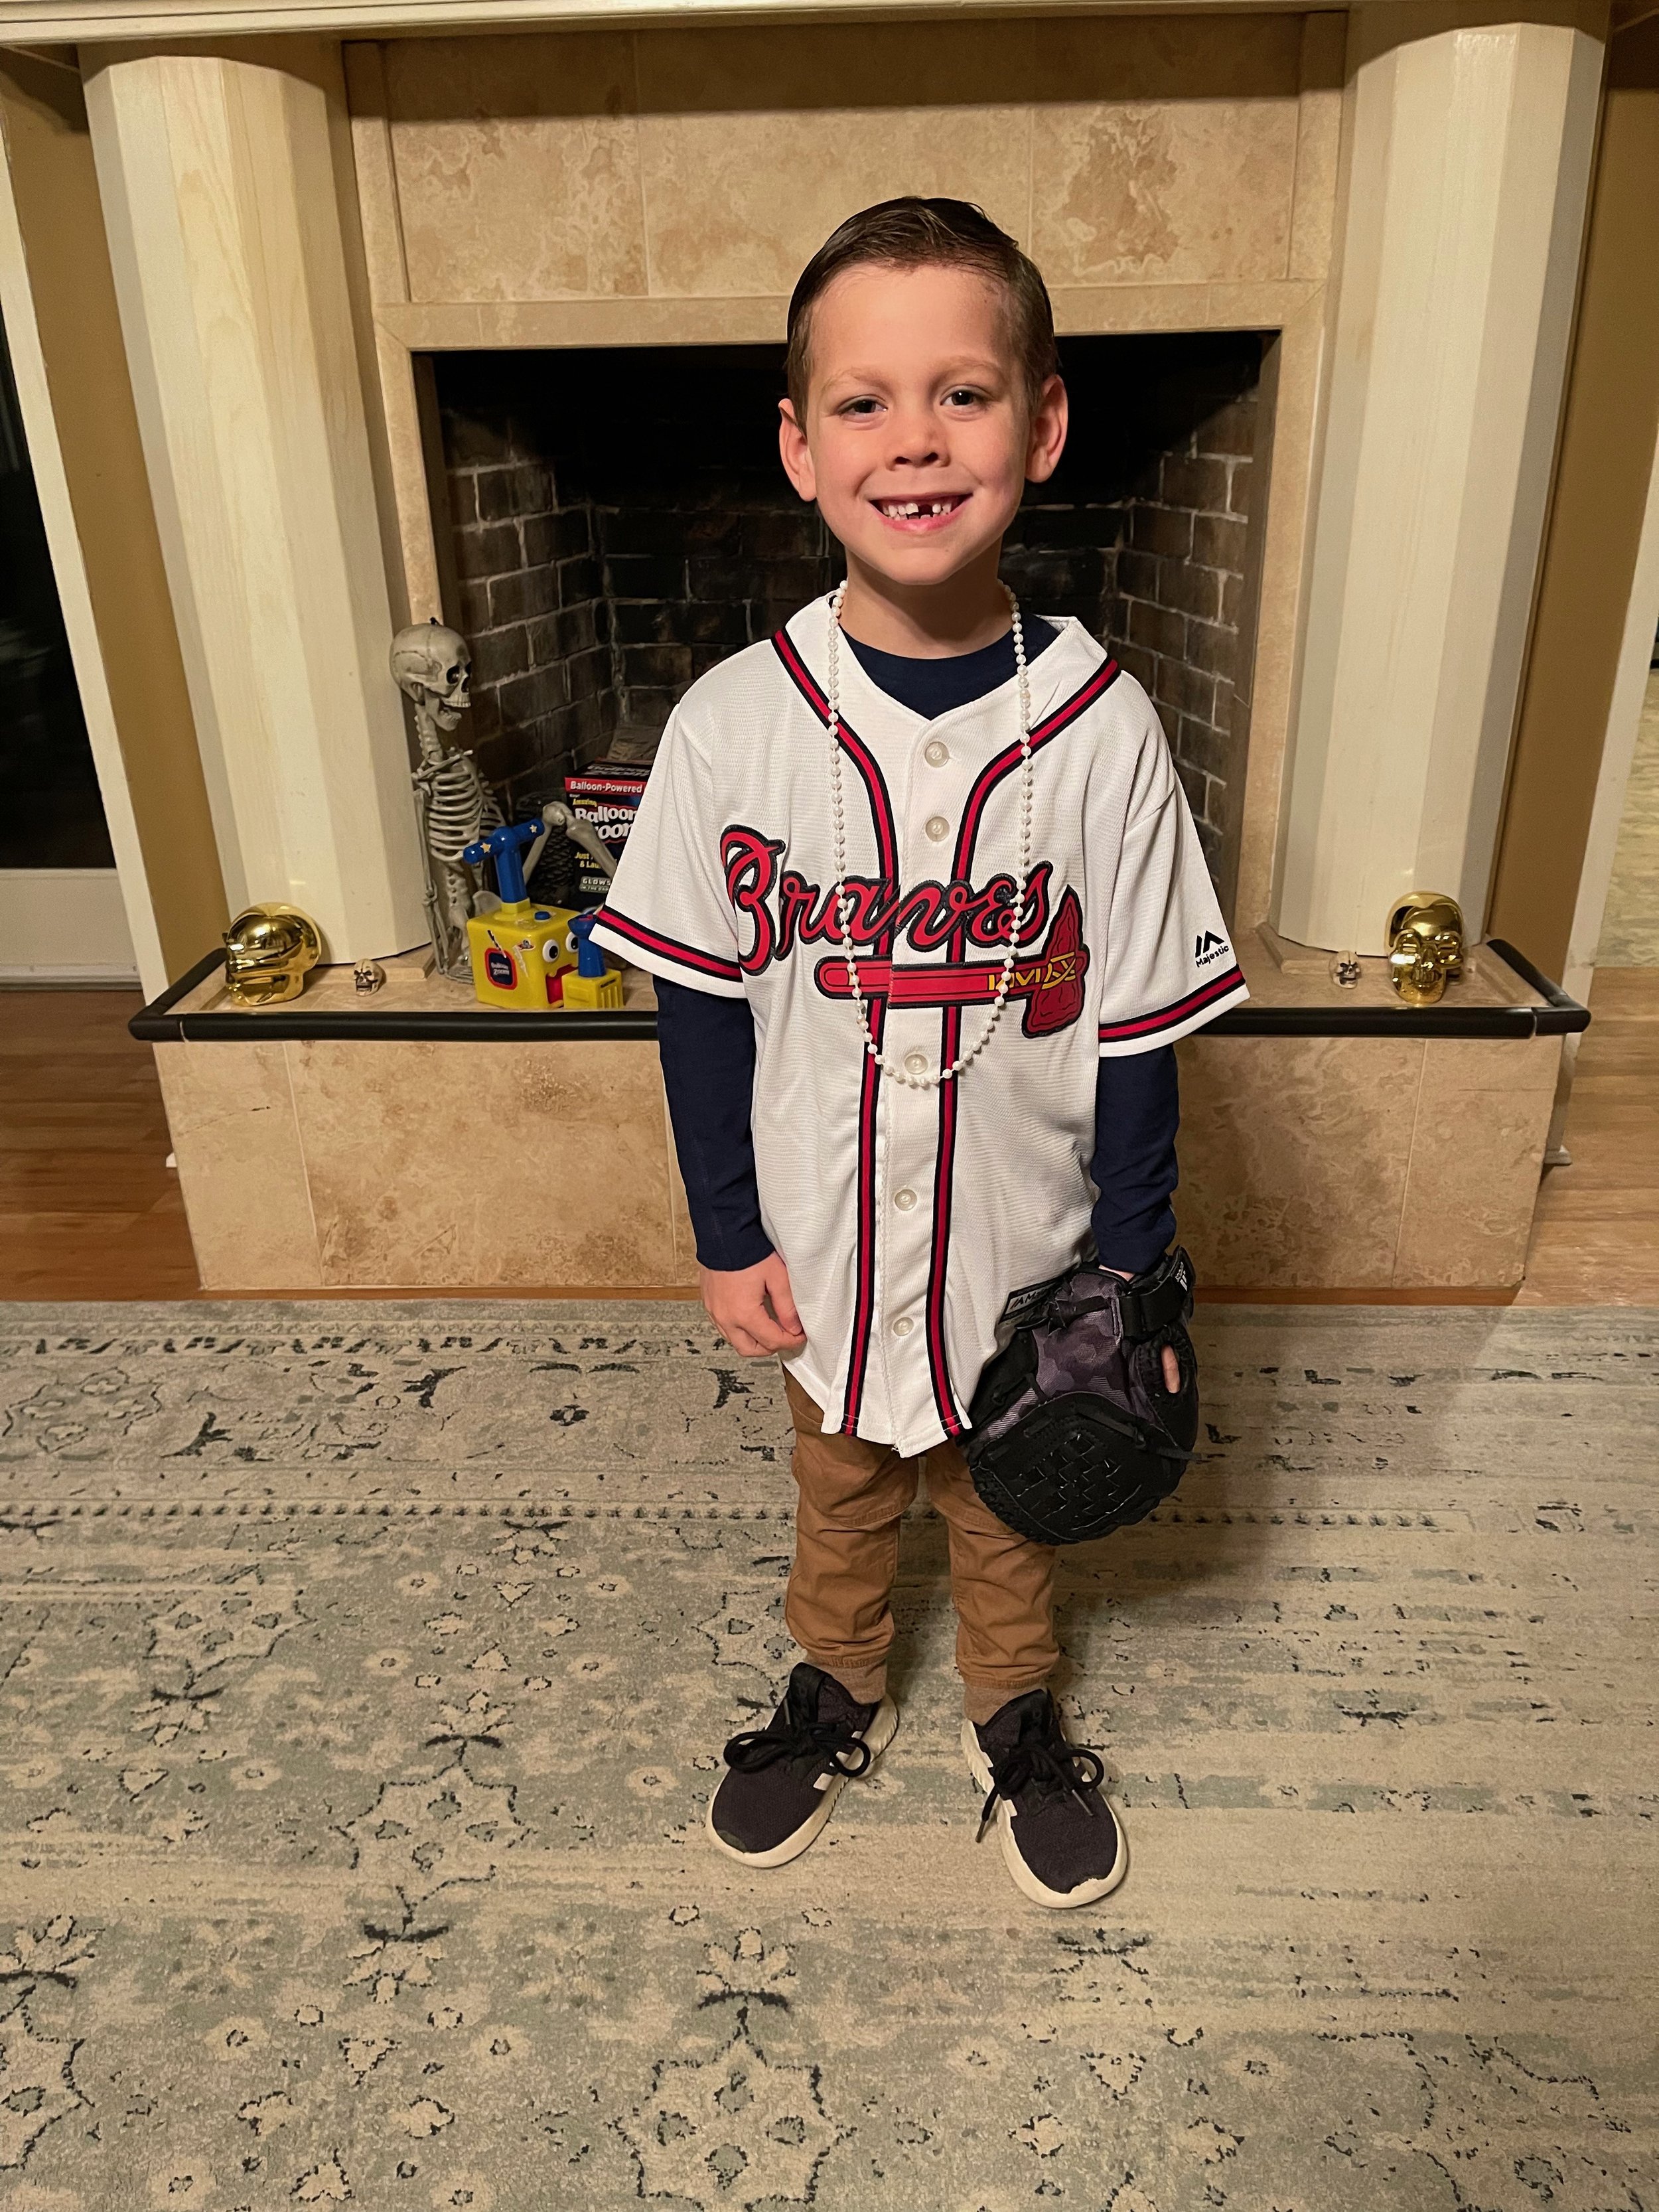 Banks is ready for the Braves to take the championship